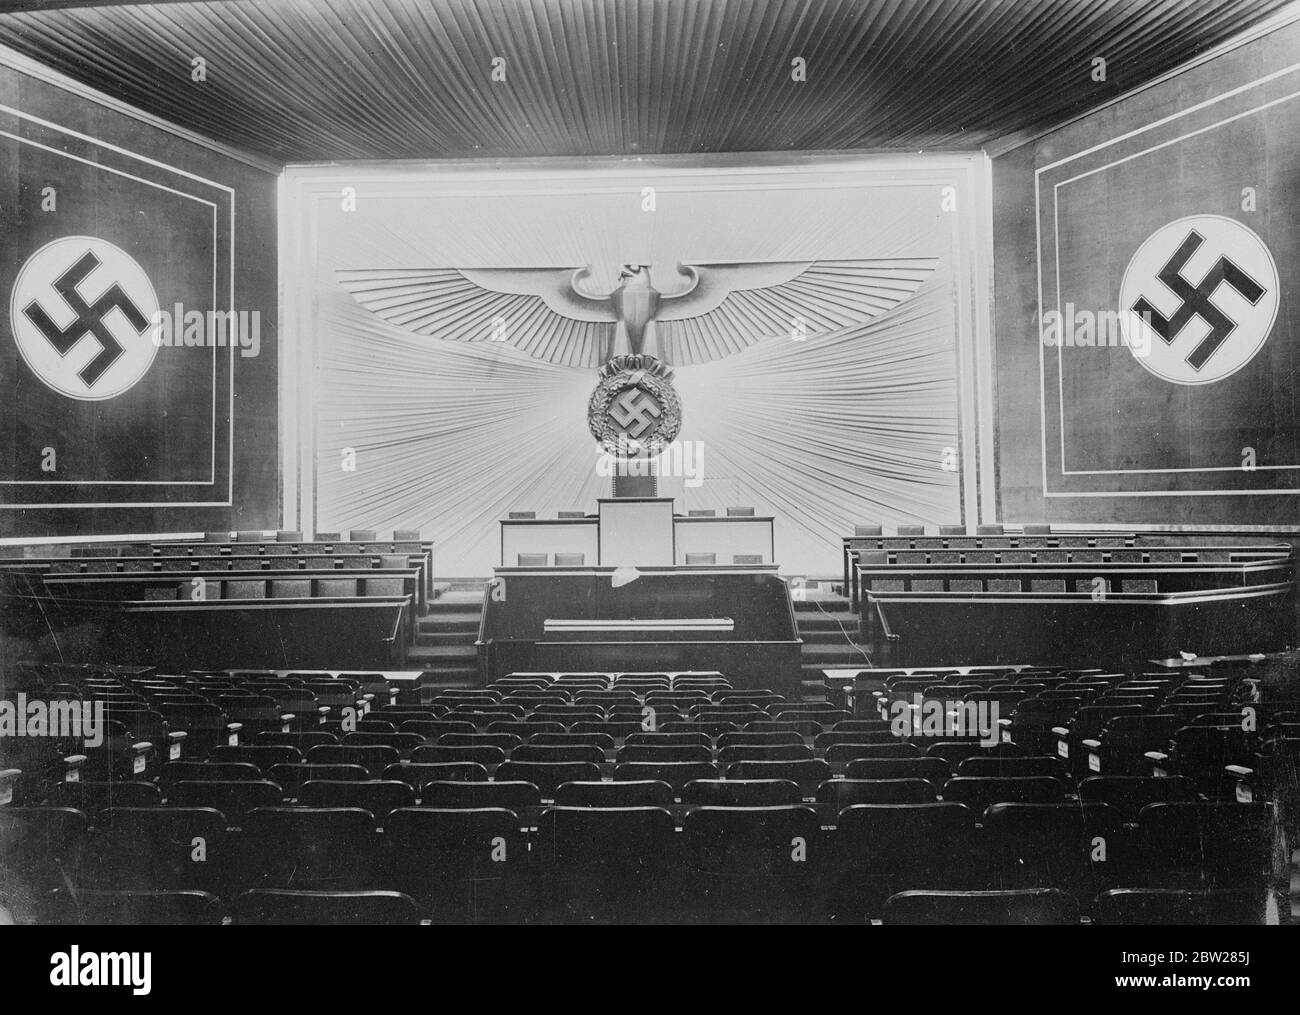 Where Hitler will make momentous speech to Reichstag. The Kroll Opera House in Berlin, ready with Nazi swastikas and German Eagle, prominently displayed, for the meeting of the Reichstag tomorrow (Sunday) . When Hitler is expected to make an announcement of the Austrian coup. 19 February 1938 Stock Photo